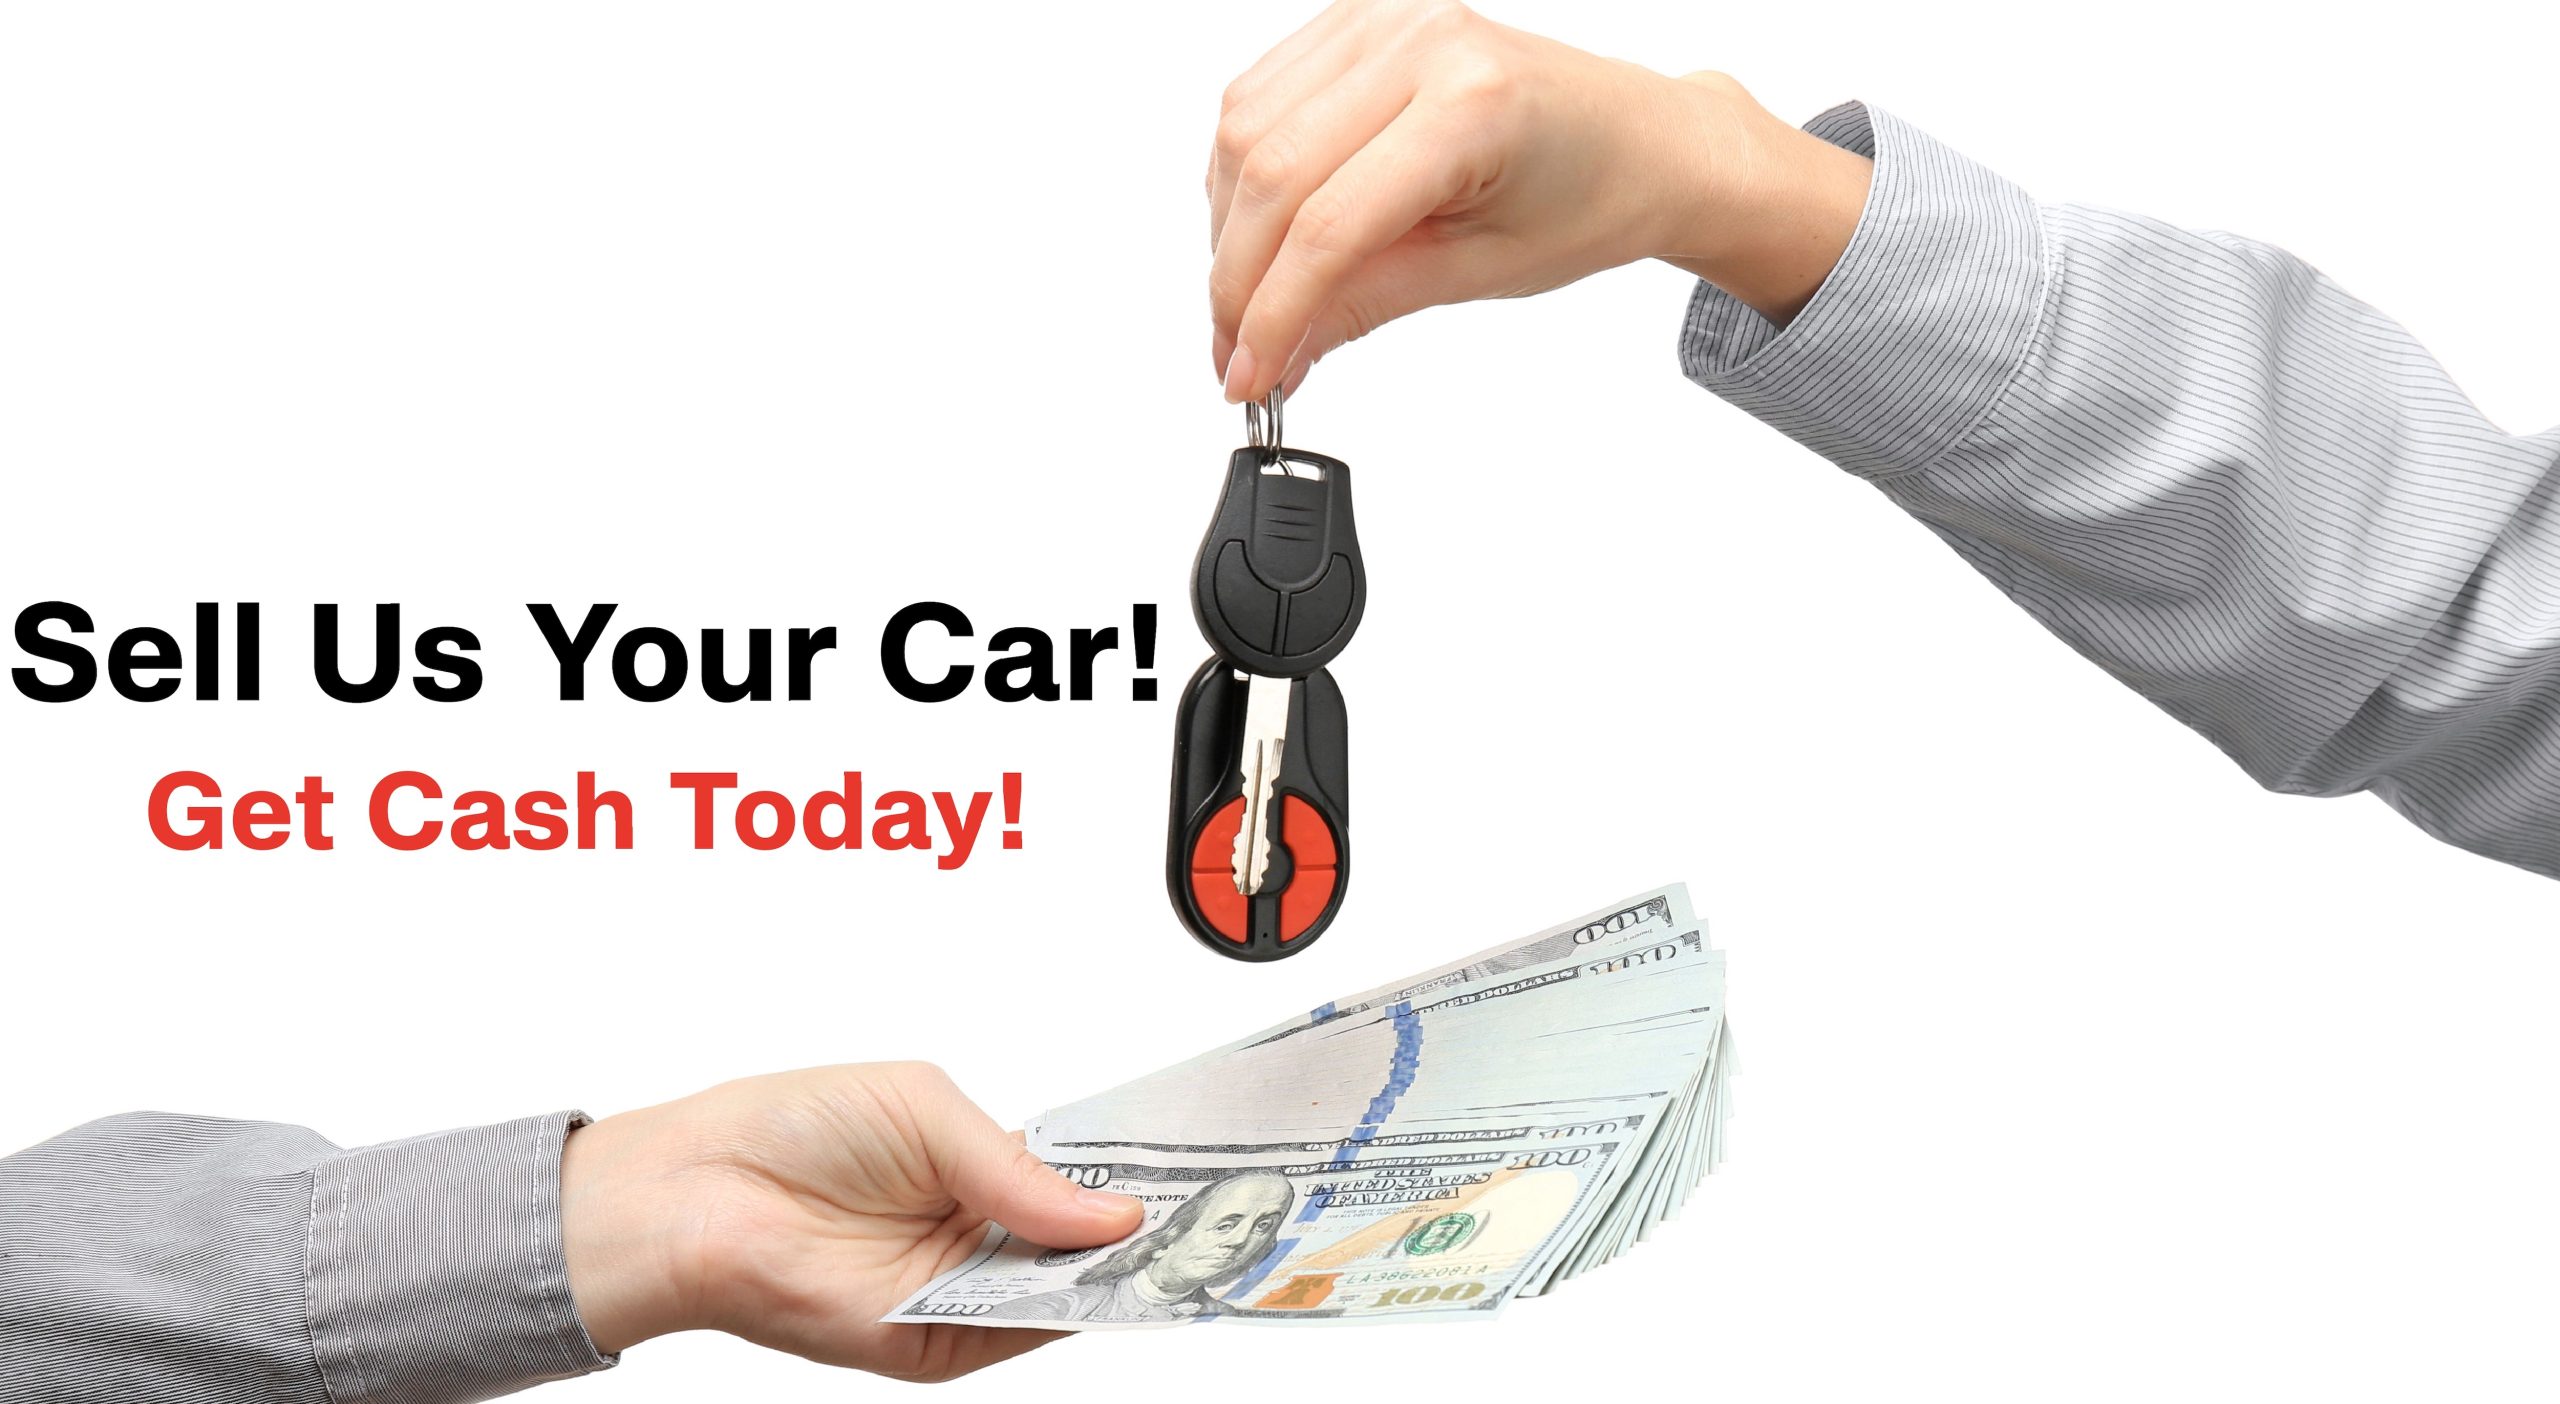 We'll buy your car even if you do not purchase from us.